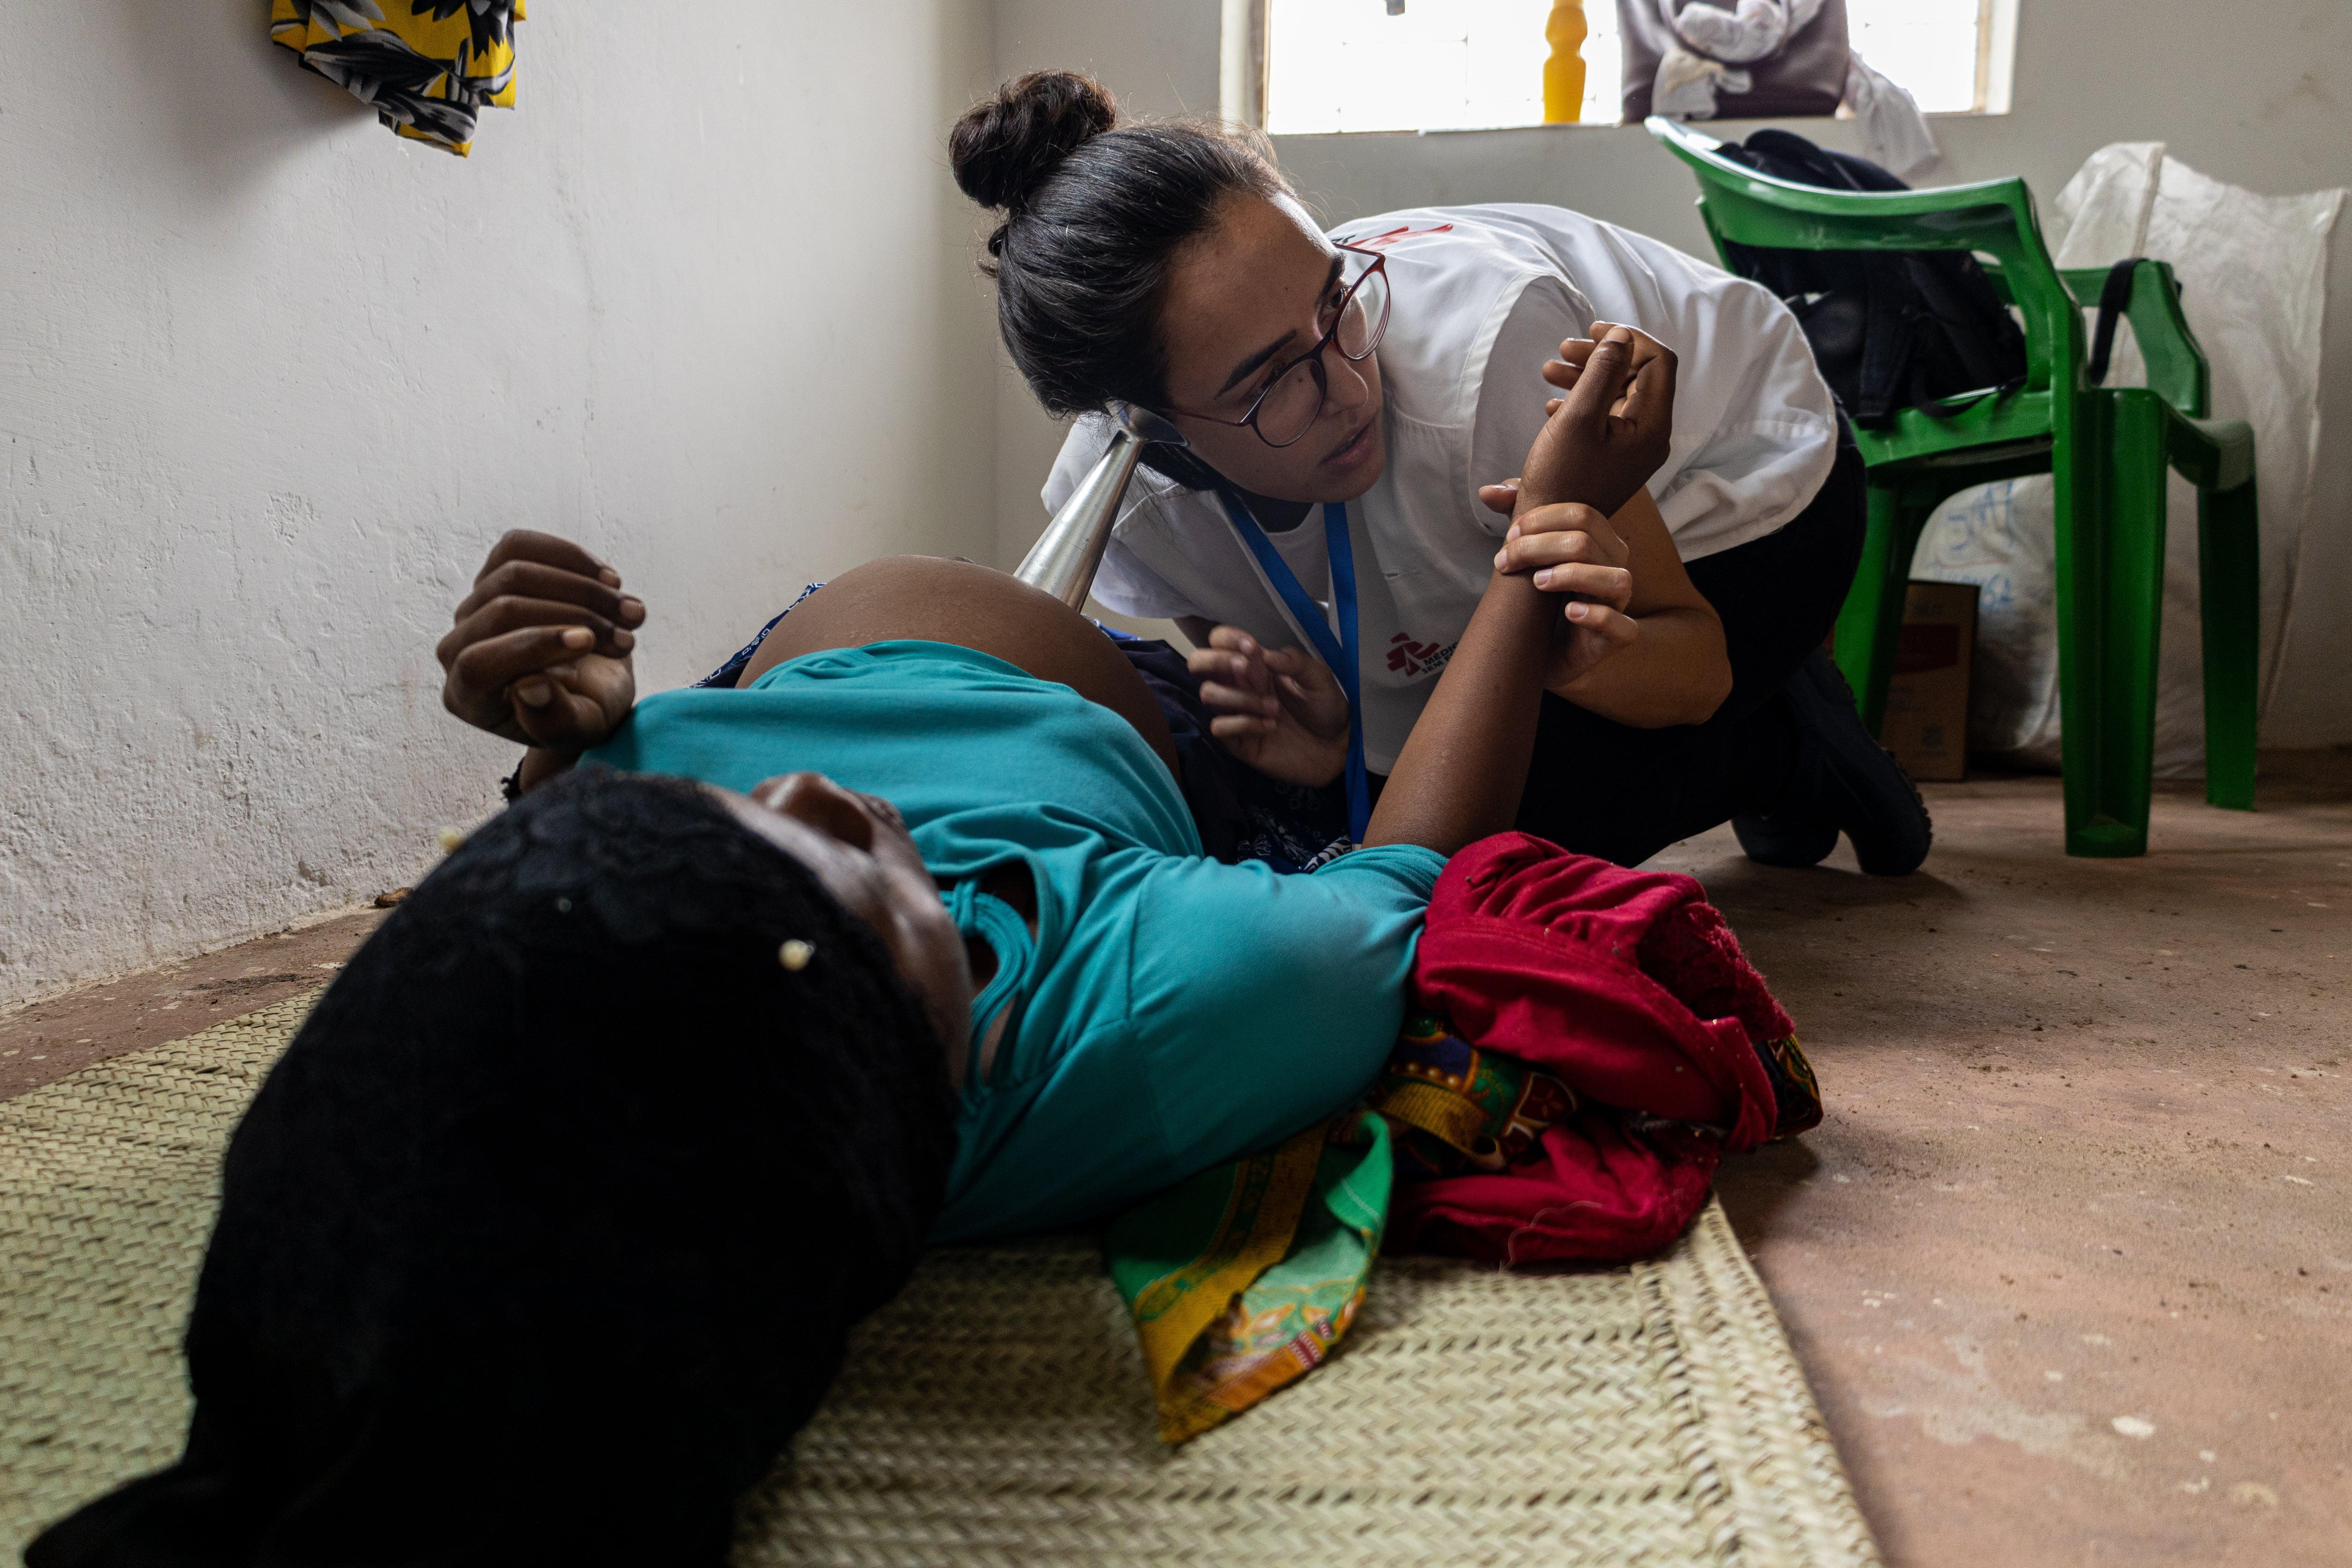 40 Years of Medical Services in Mozambique: An MSF midwife examines a patient in Palma.